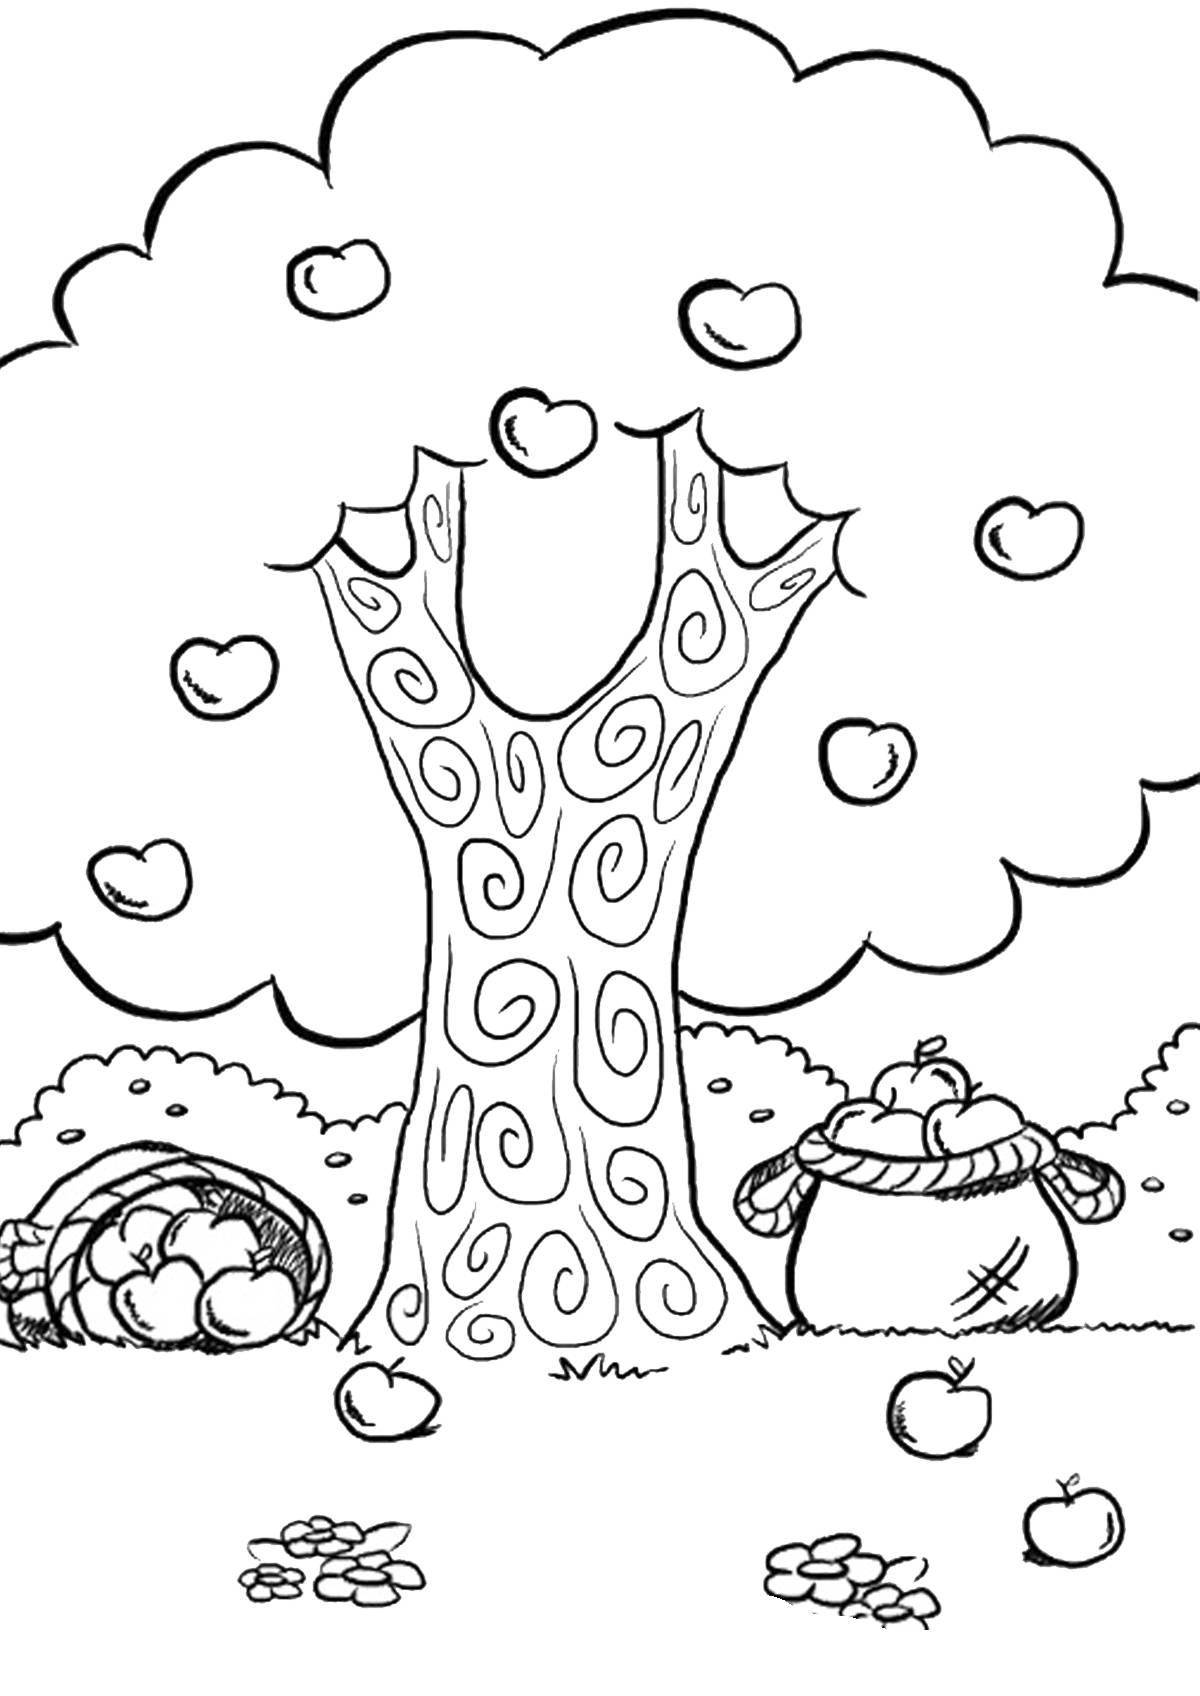 Jazz garden coloring pages for kids